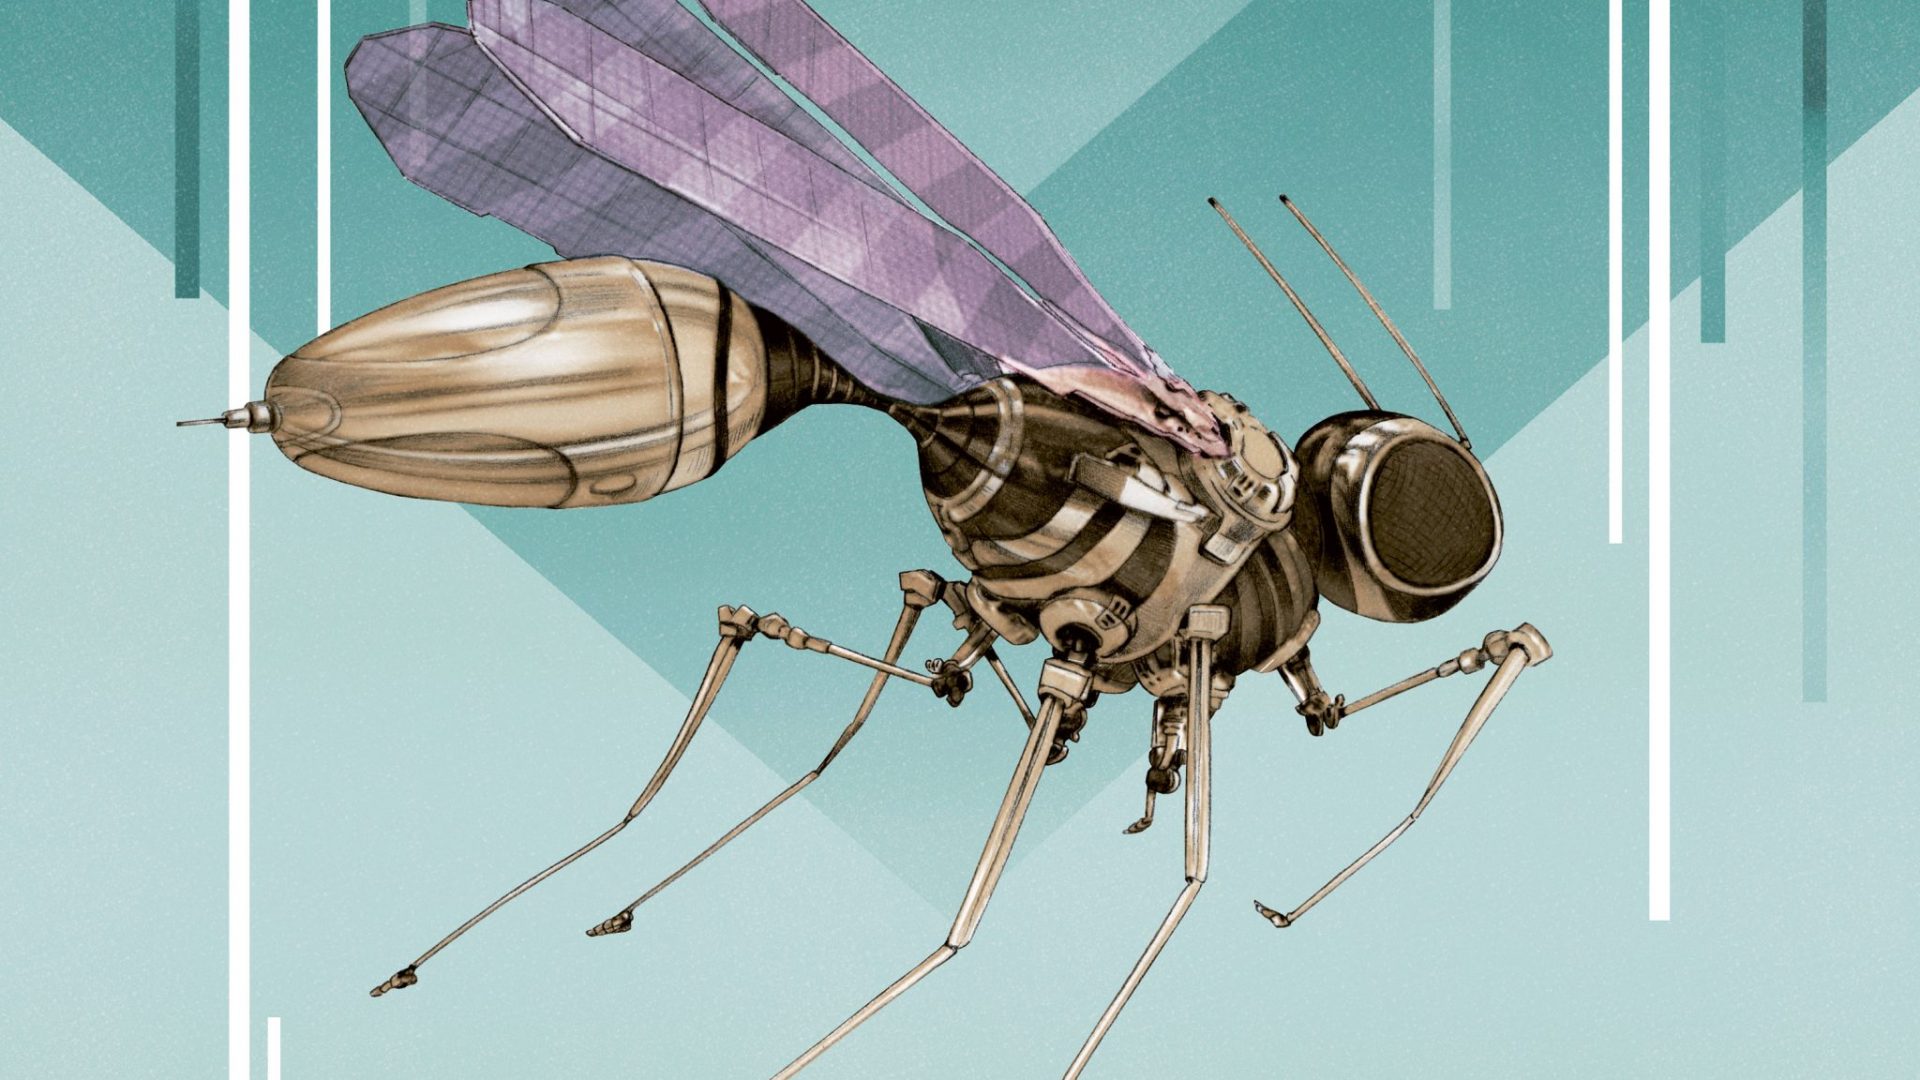 Image of a Fly robot